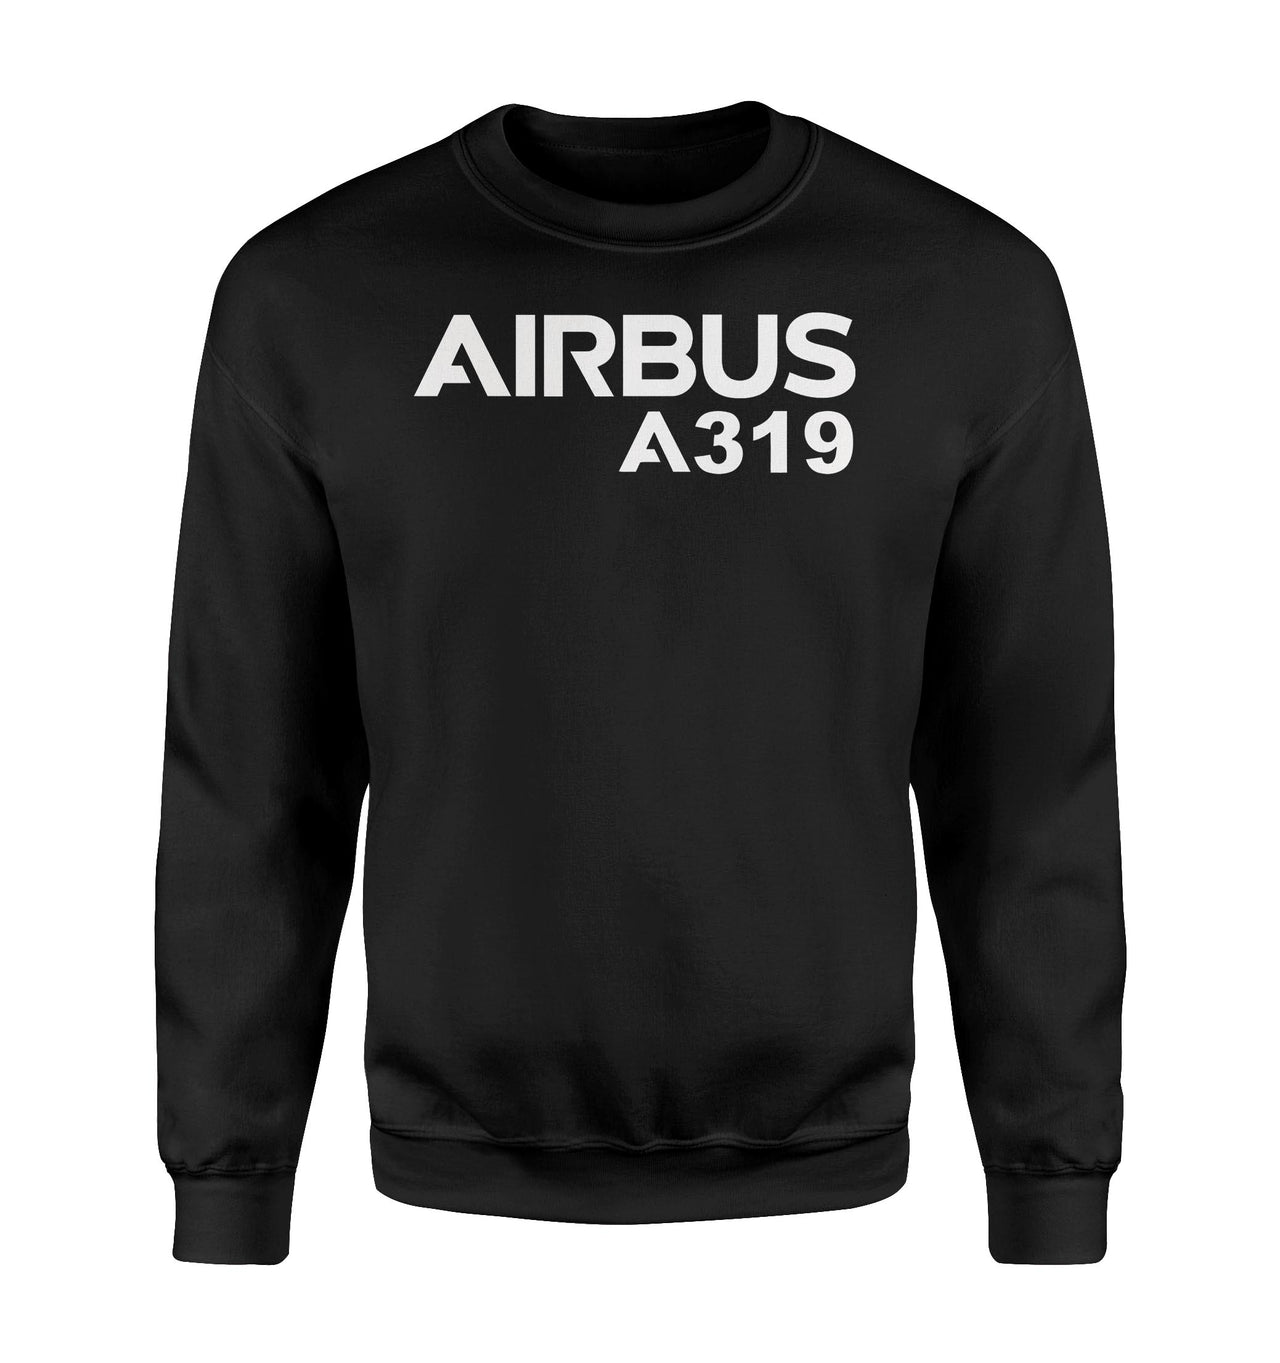 Airbus A319 & Text Designed Sweatshirts